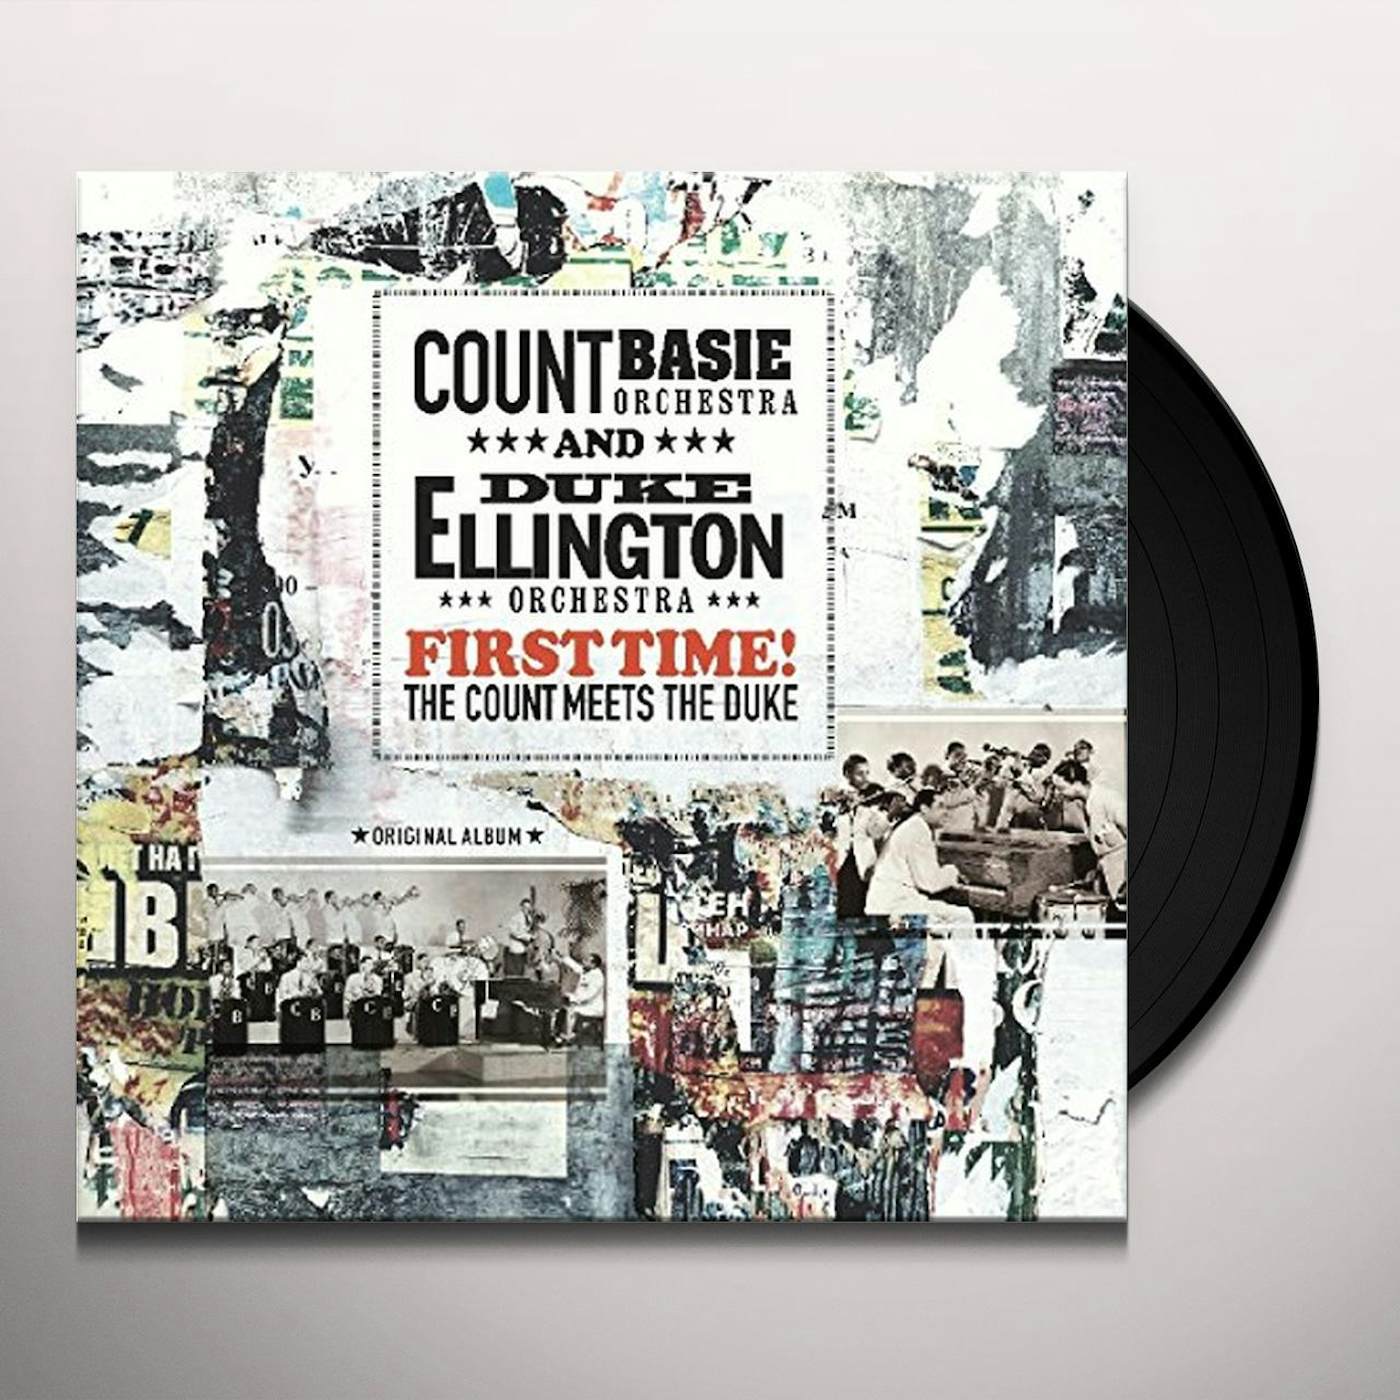 Count Basie FIRST TIME: THE COUNT MEETS THE DUKE Vinyl Record